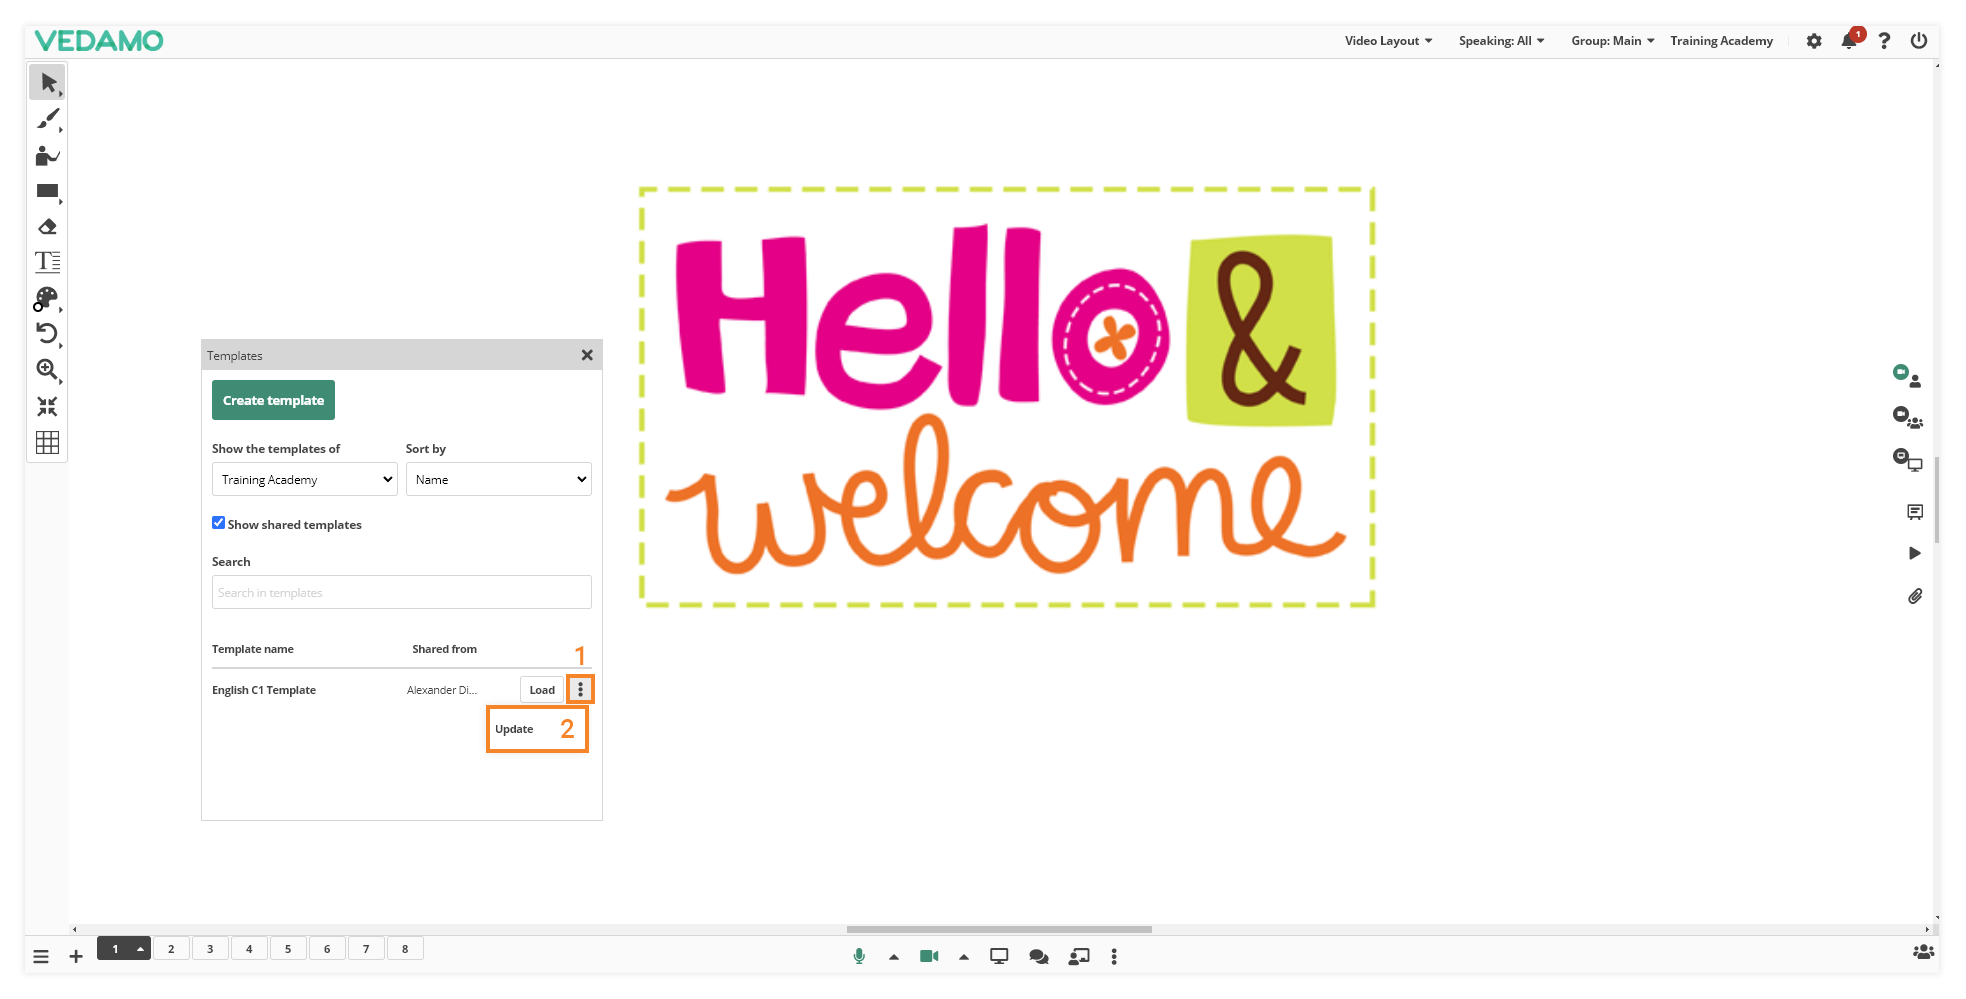 Virtual Classroom Templates: When all the changes have been done, just click on the "Update" button to save the changes.